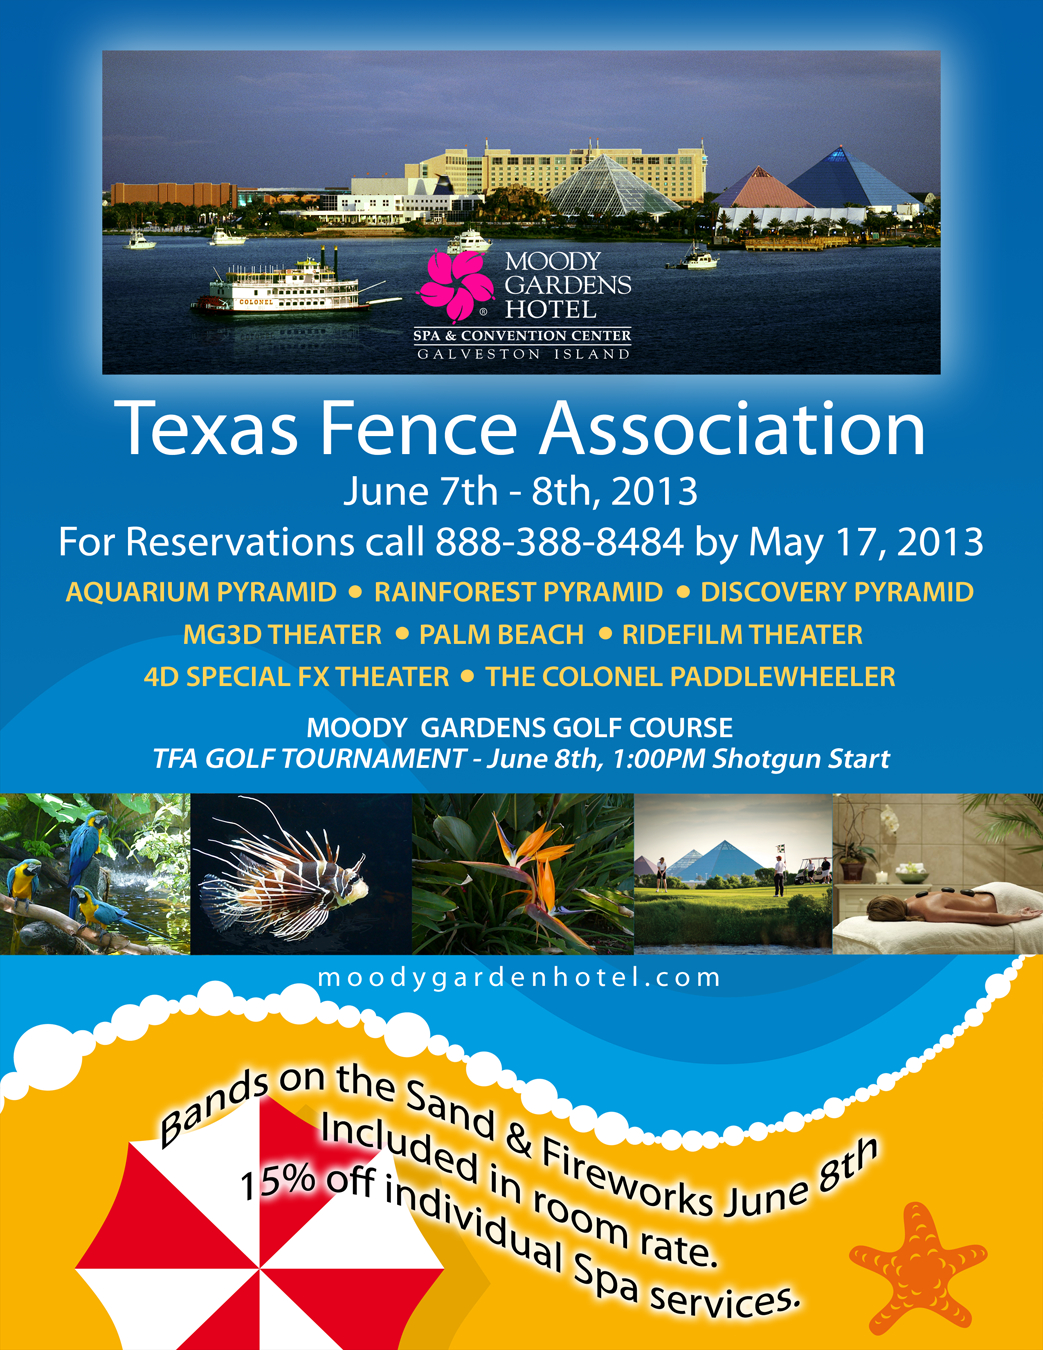 Texas Fence Association - June 2013 Meeting at Moody Gardens